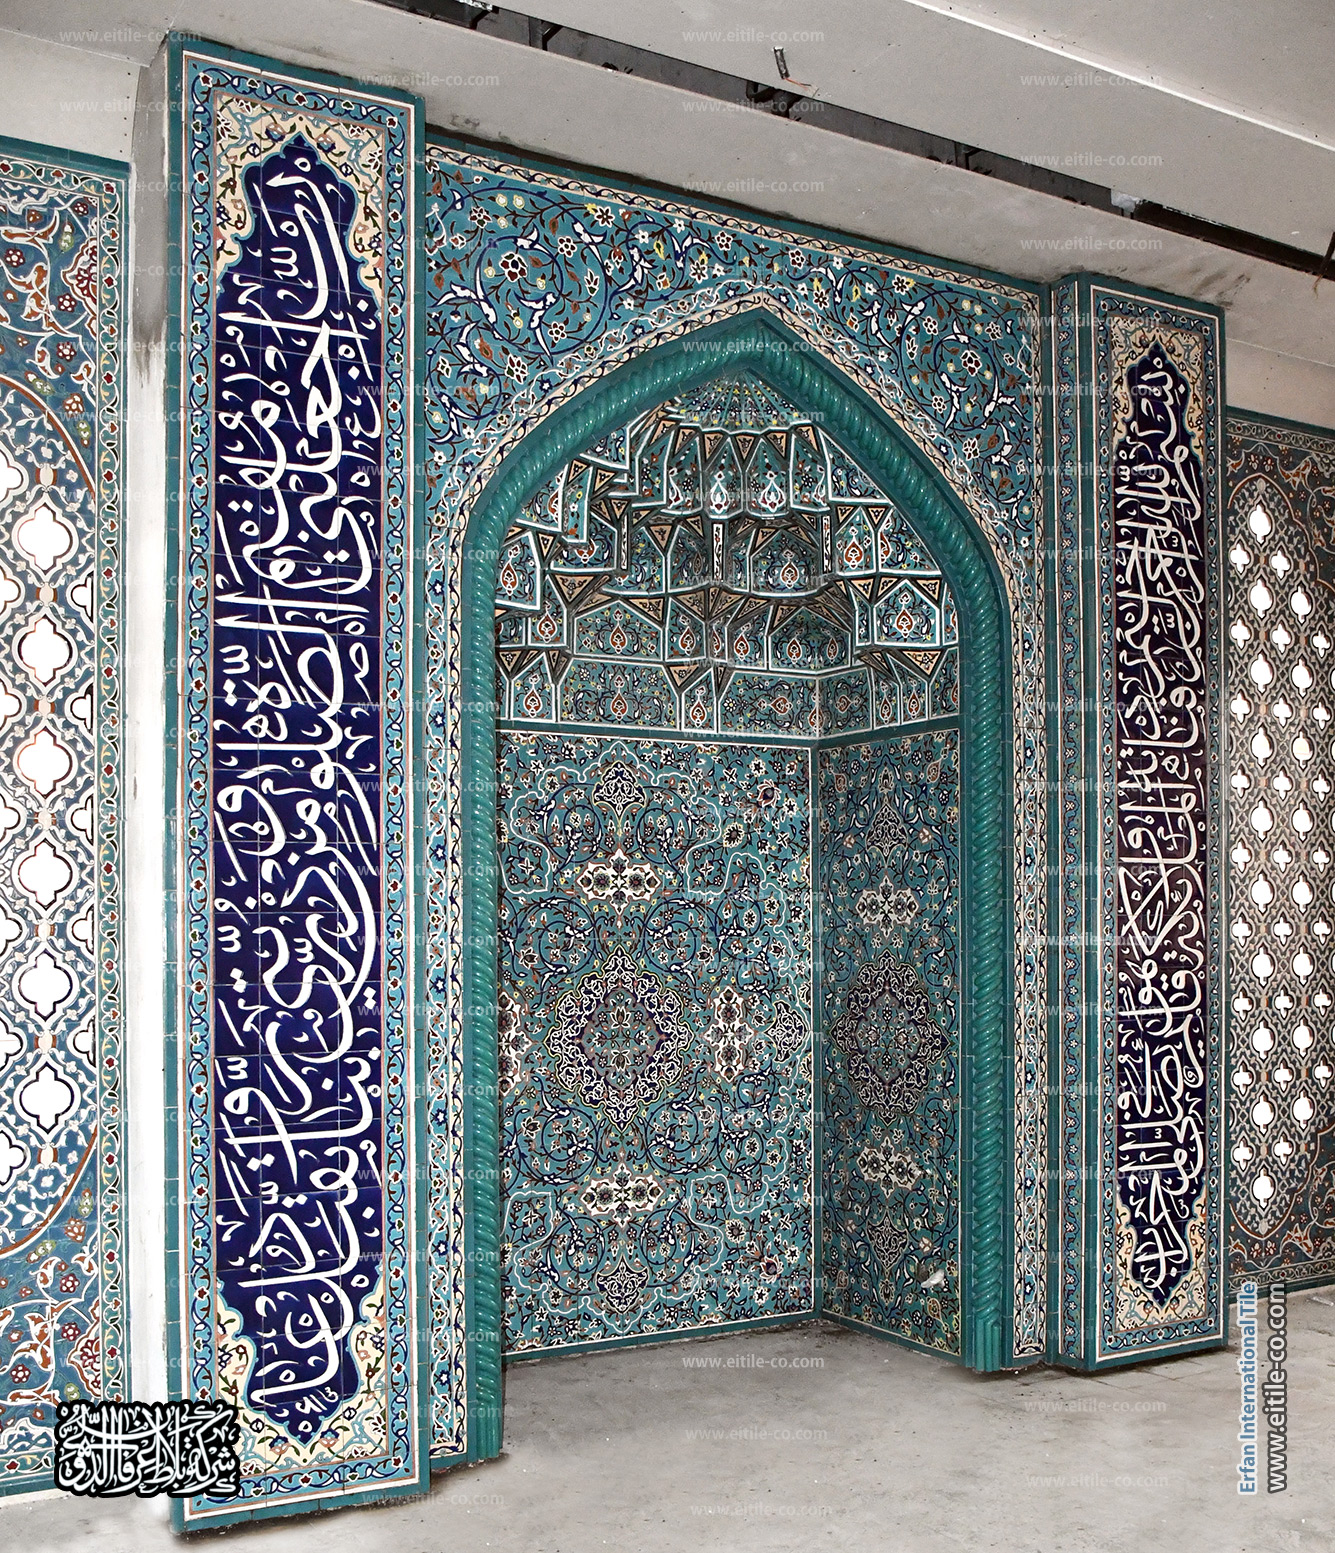 Ceramic rope tiles for mosque mihrab decoration, www.eitile-co.com